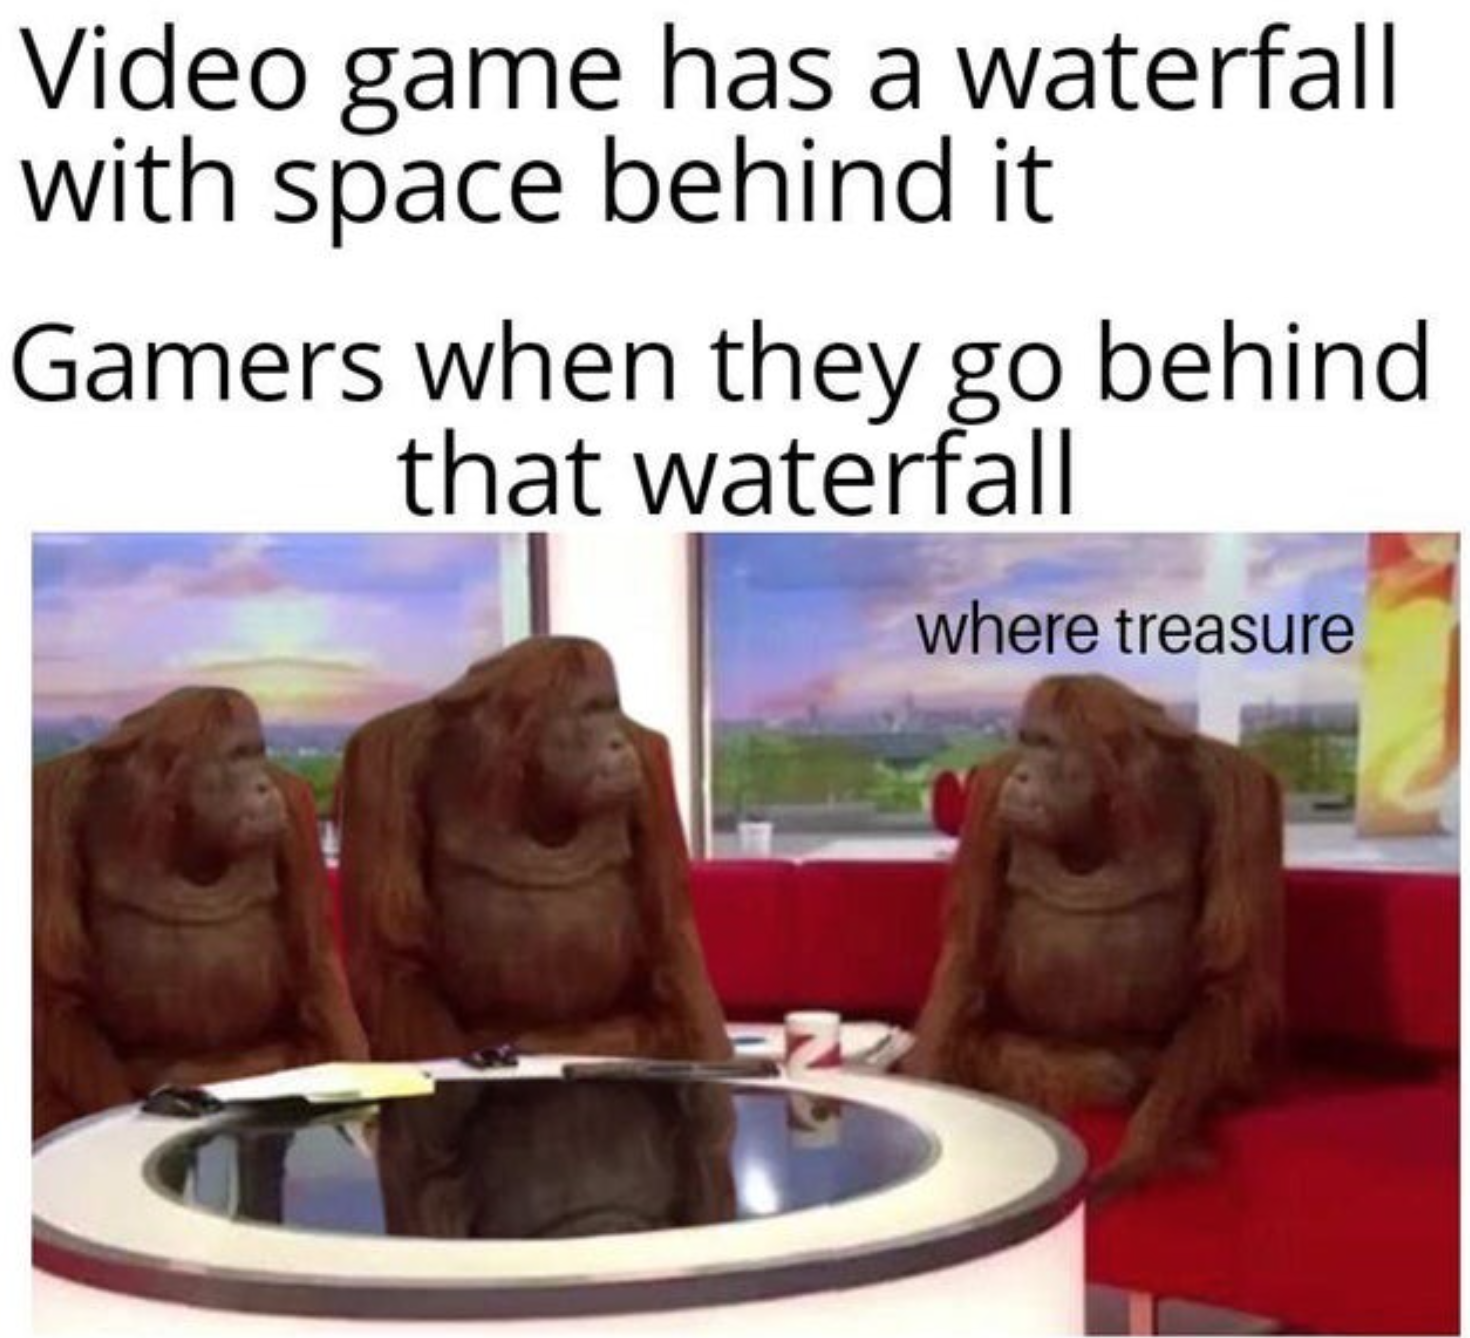 funny gaming memes - banana meme template - Video game has a waterfall with space behind it Gamers when they go behind that waterfall where treasure